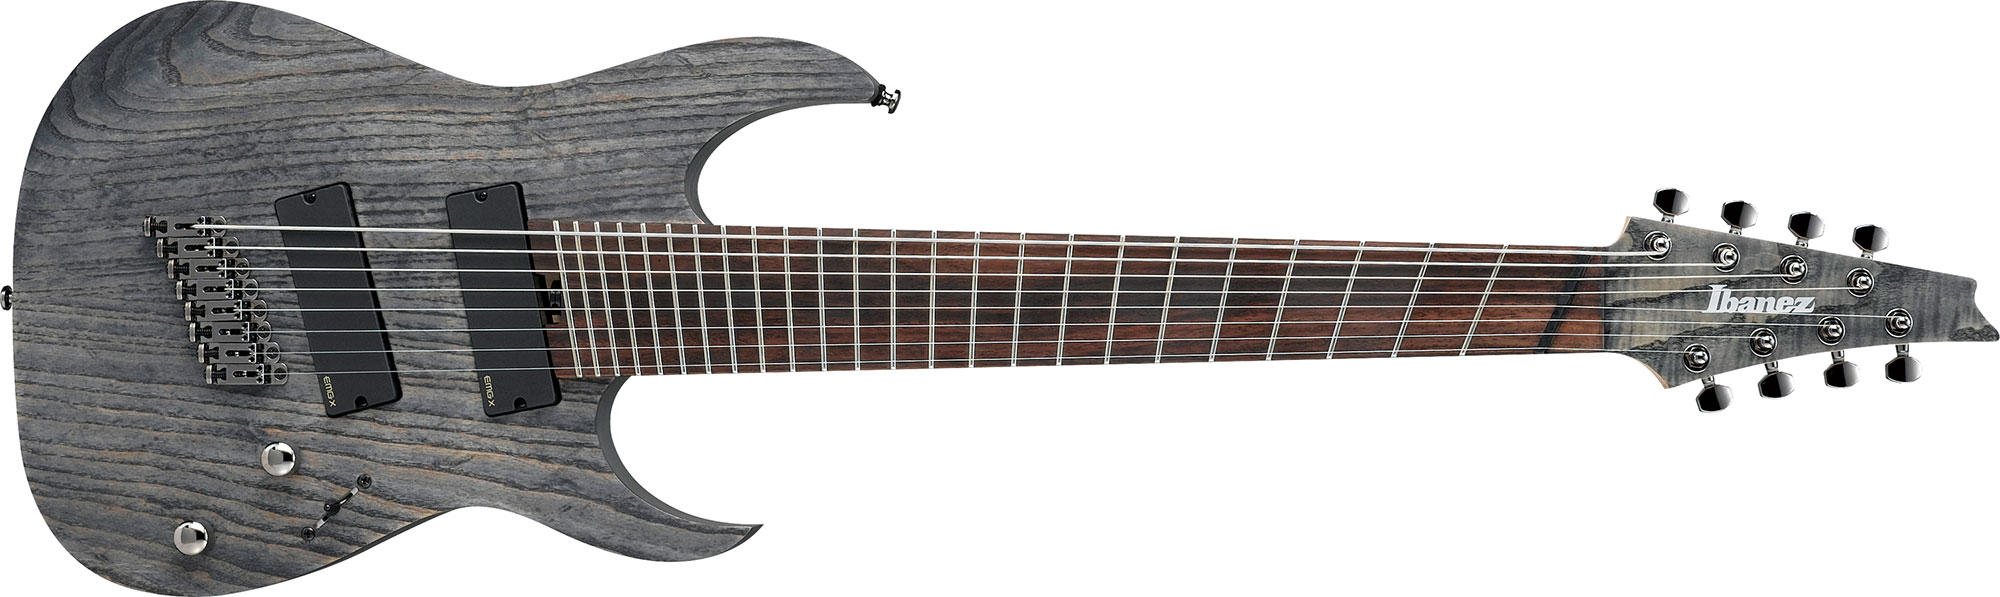 One of the first affordable production built 8 string fanned fret guitars a...